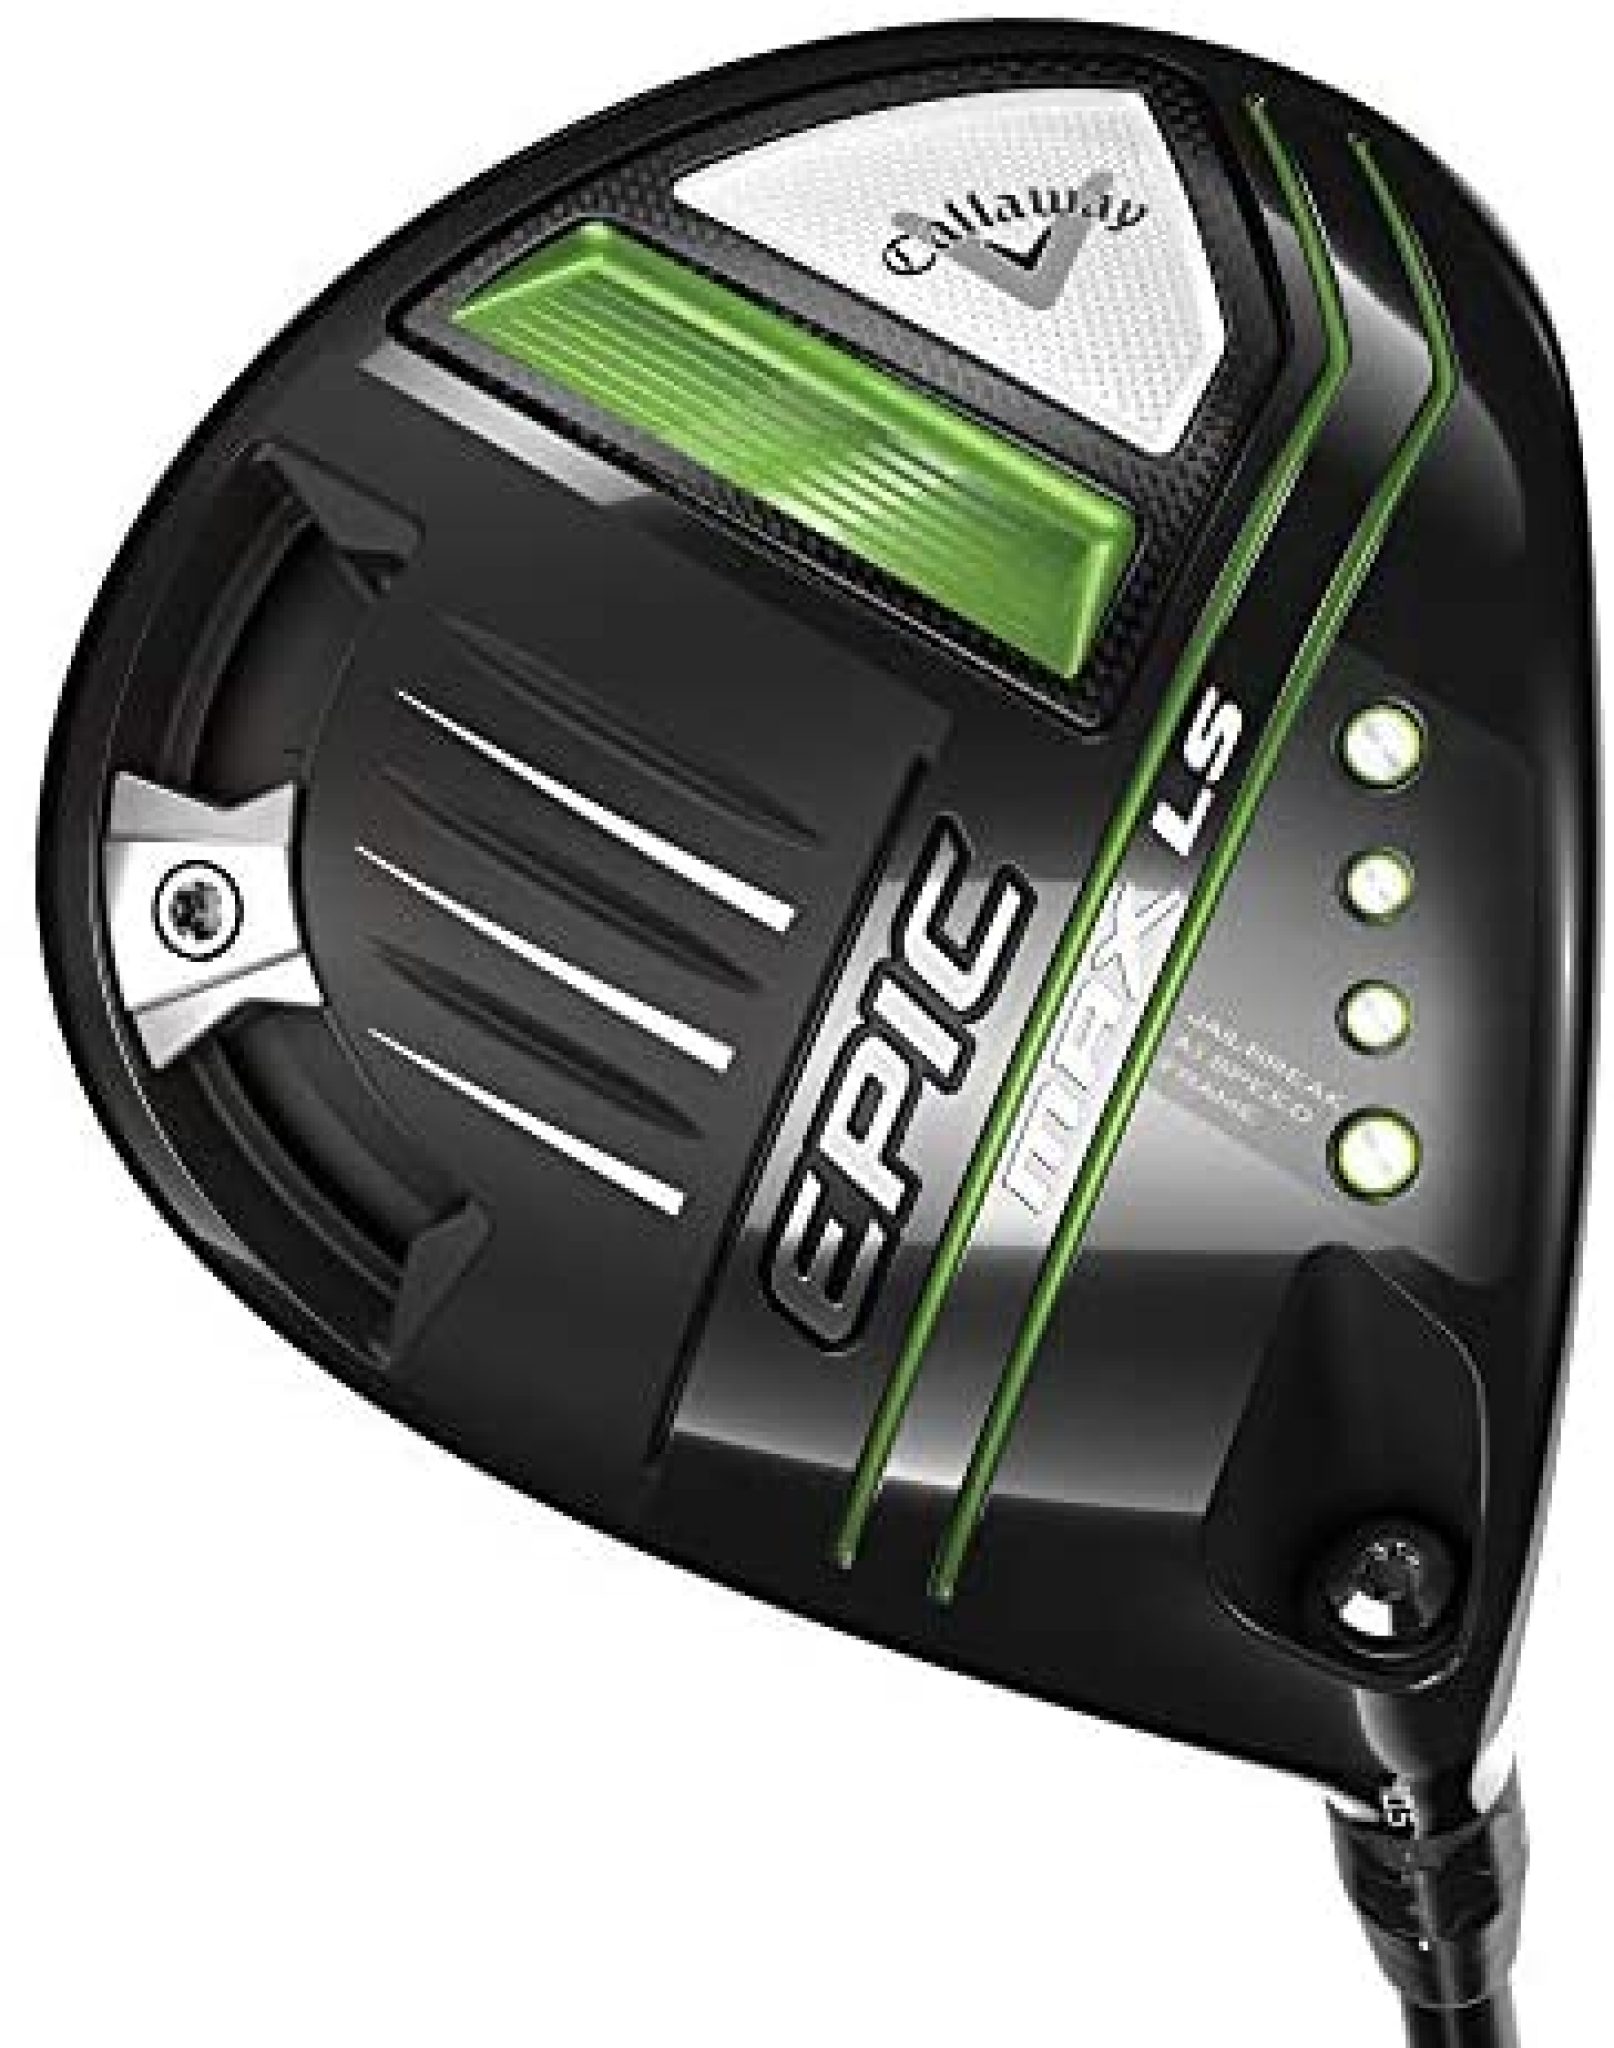 m80 golf driver review